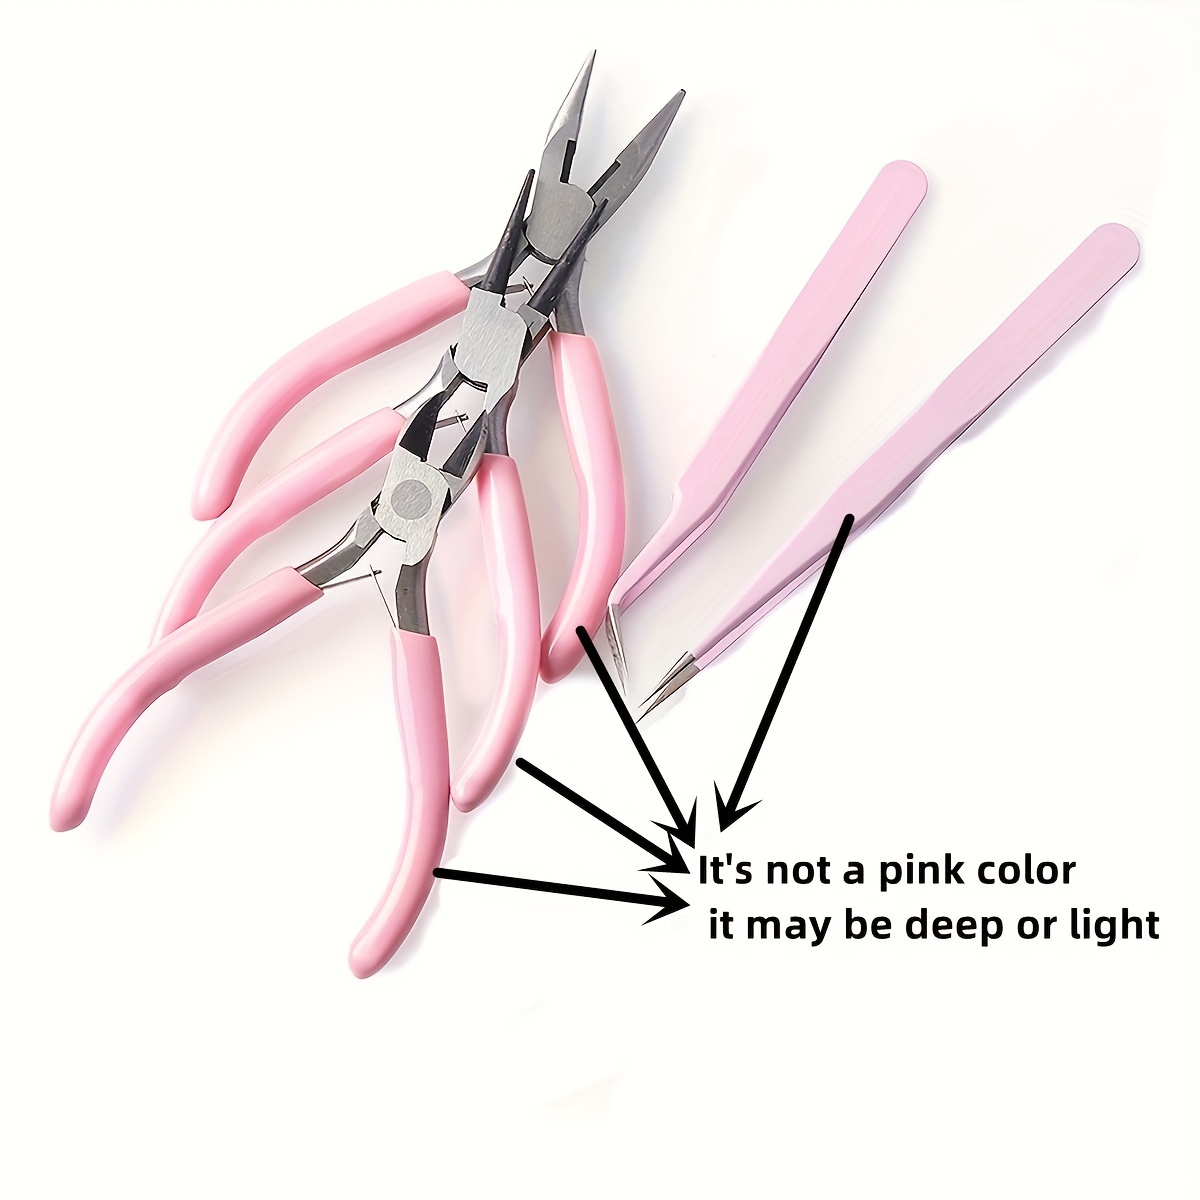 1PC 6-in-1 Making Pliers DIY Jewelry Making Pliers Tweezers Tool Needle  Spoon Tool Set for Silicone Resin Mold Jewelry Making